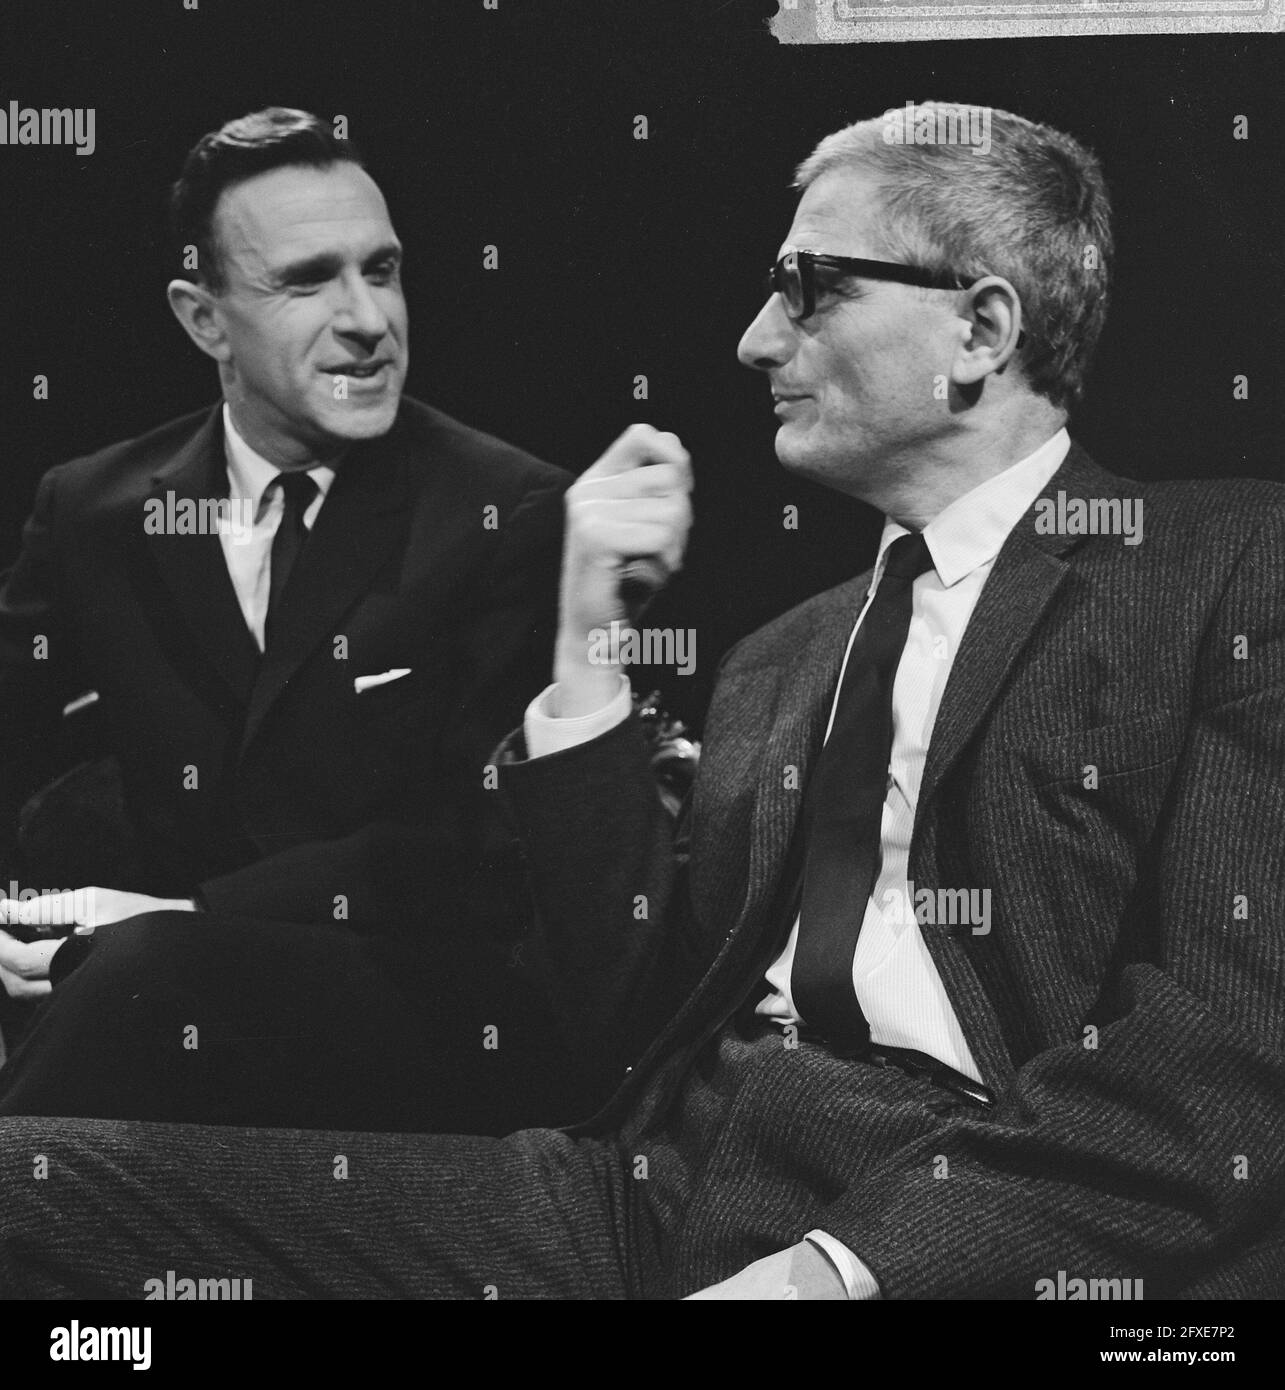 Television program Literary Encounters, Mr. H.A. Gomperts (l) has an interview with the poet Adriaan Morriën (r) tonight, January 8, 1964, poets, television programs, The Netherlands, 20th century press agency photo, news to remember, documentary, historic photography 1945-1990, visual stories, human history of the Twentieth Century, capturing moments in time Stock Photo